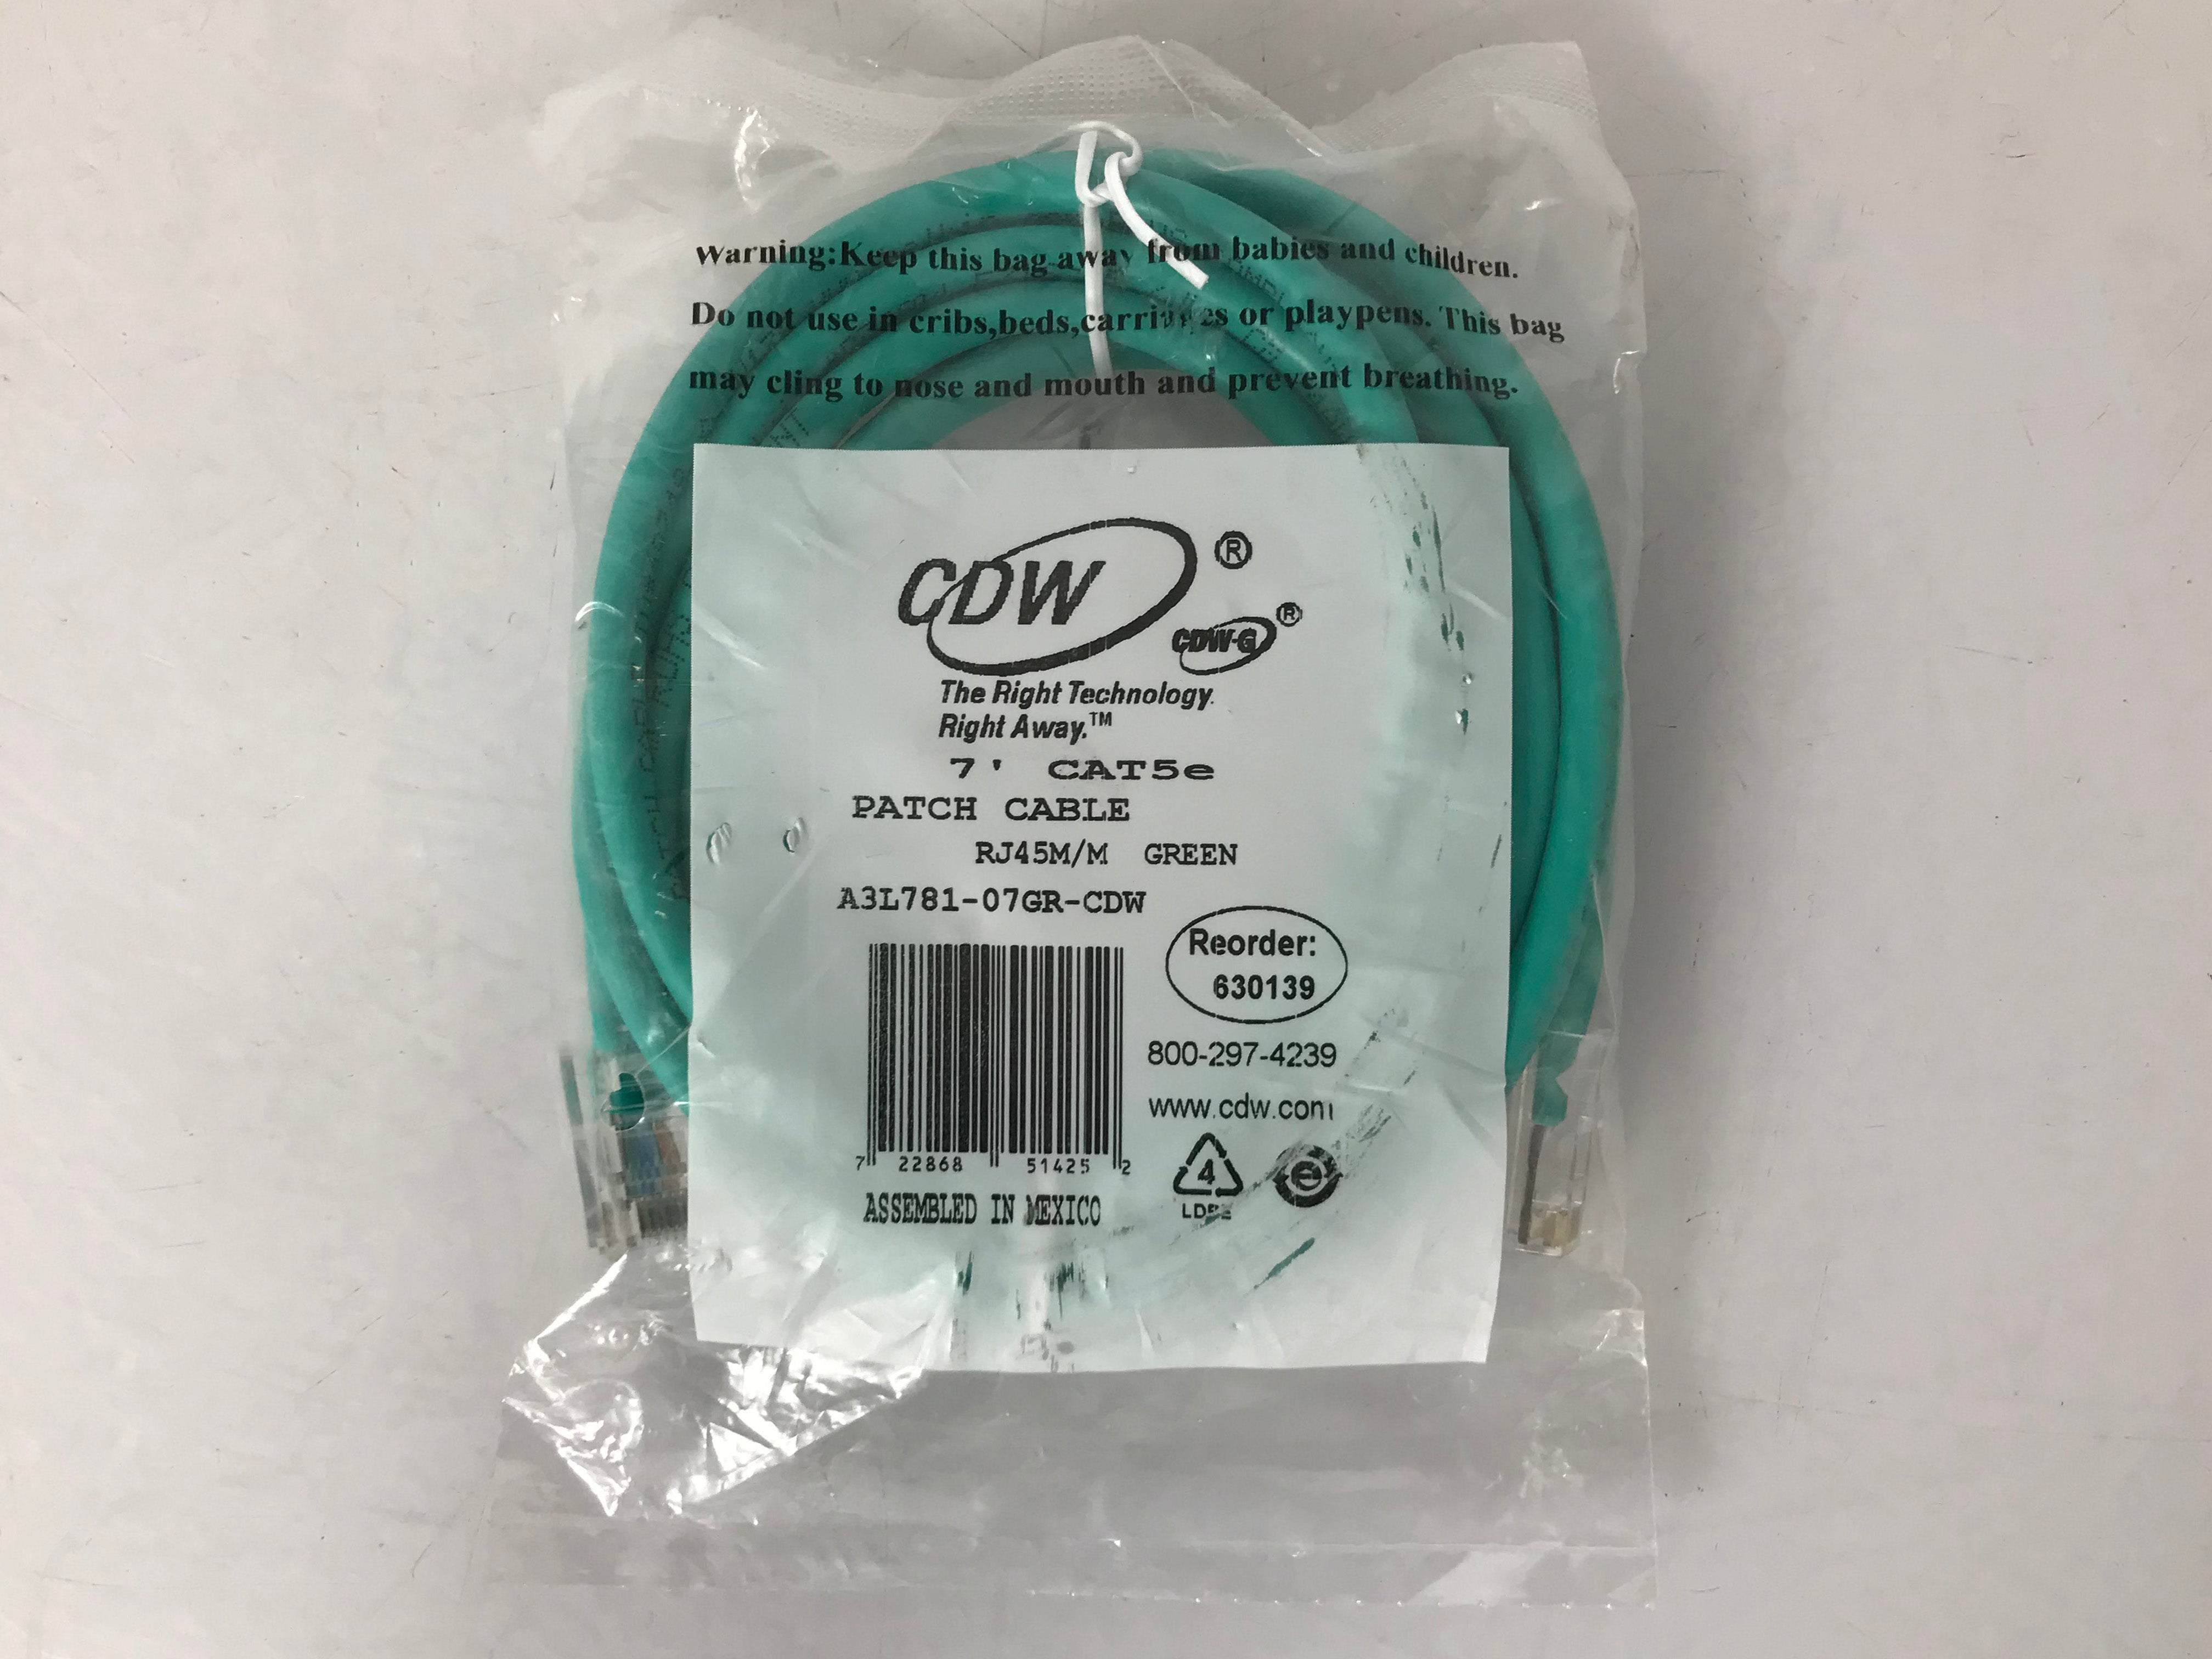 CDW RJ45M/M 7' CAT5e Patch Cable Pack of 5